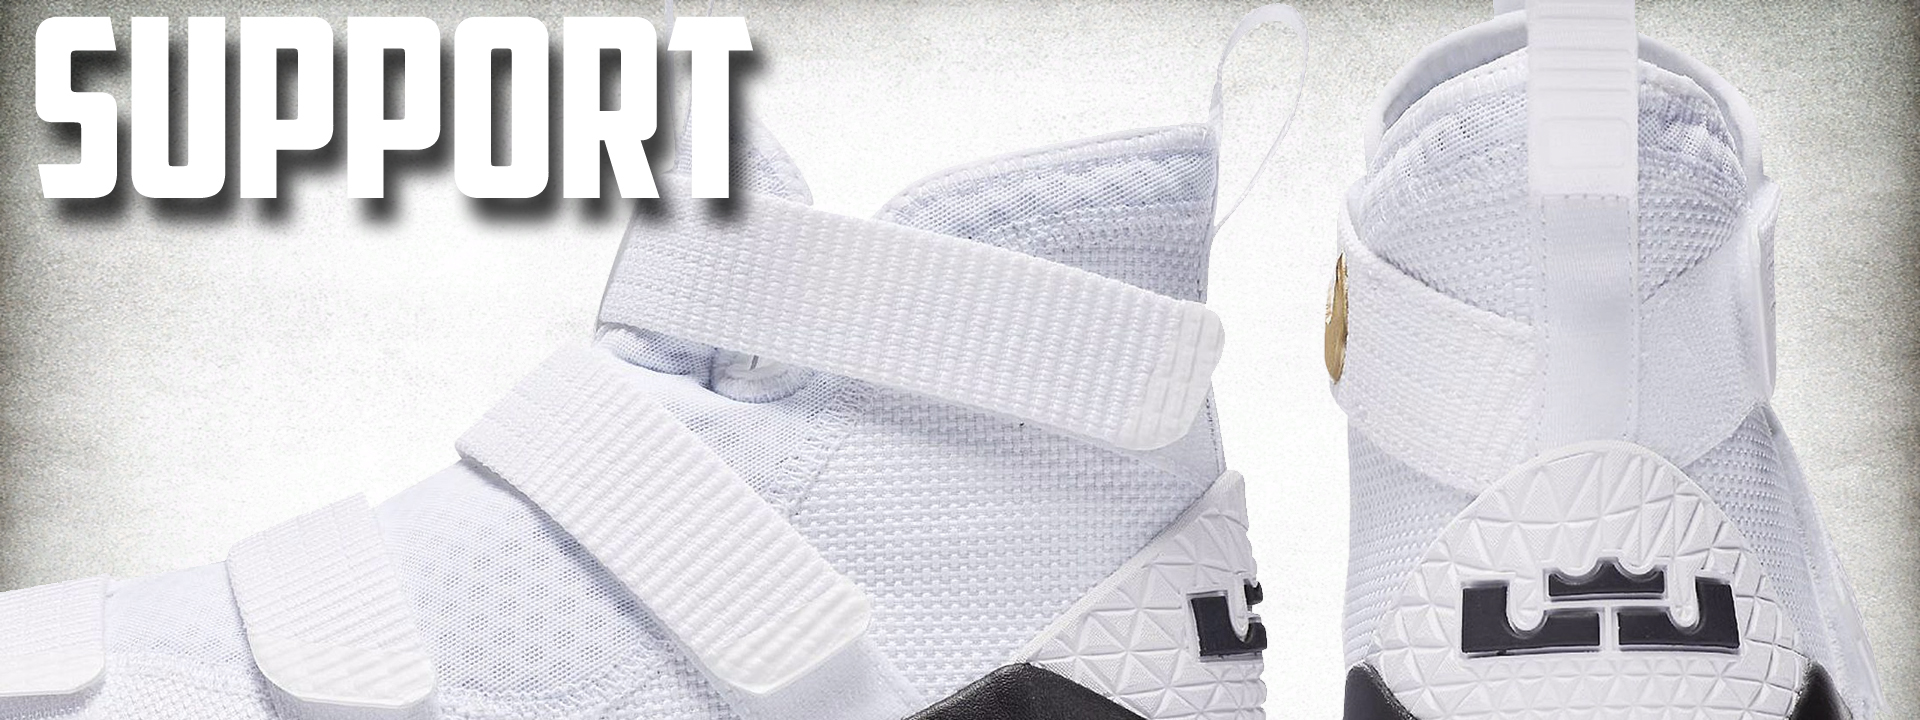 Nike LeBron Soldier 11 Performance Review support